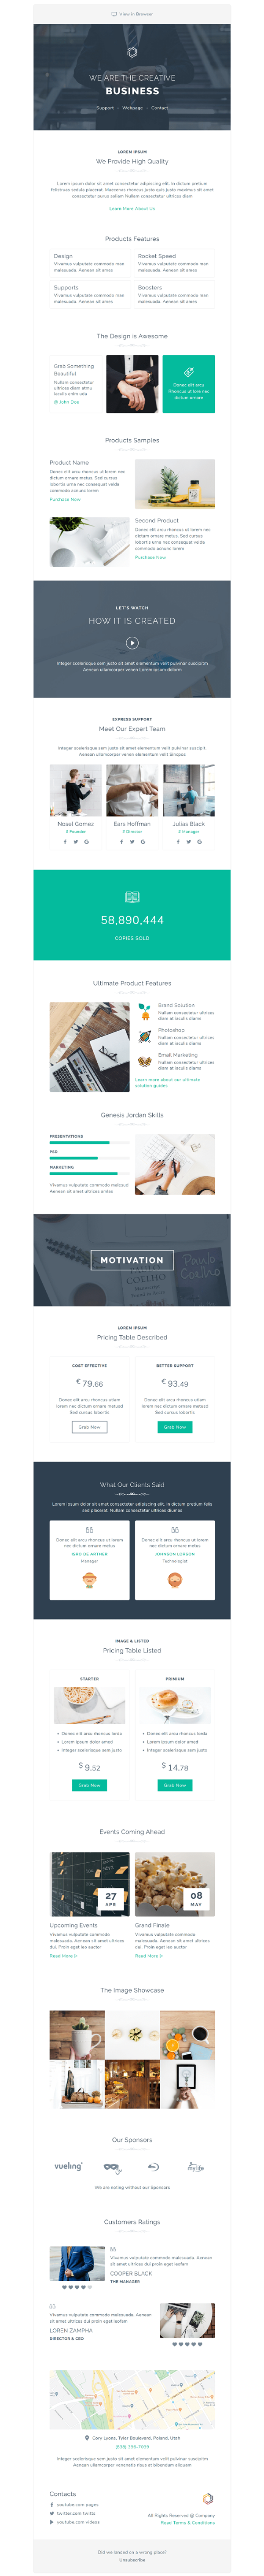 Mzone Responsive Newsletter Email Template For Business - 12